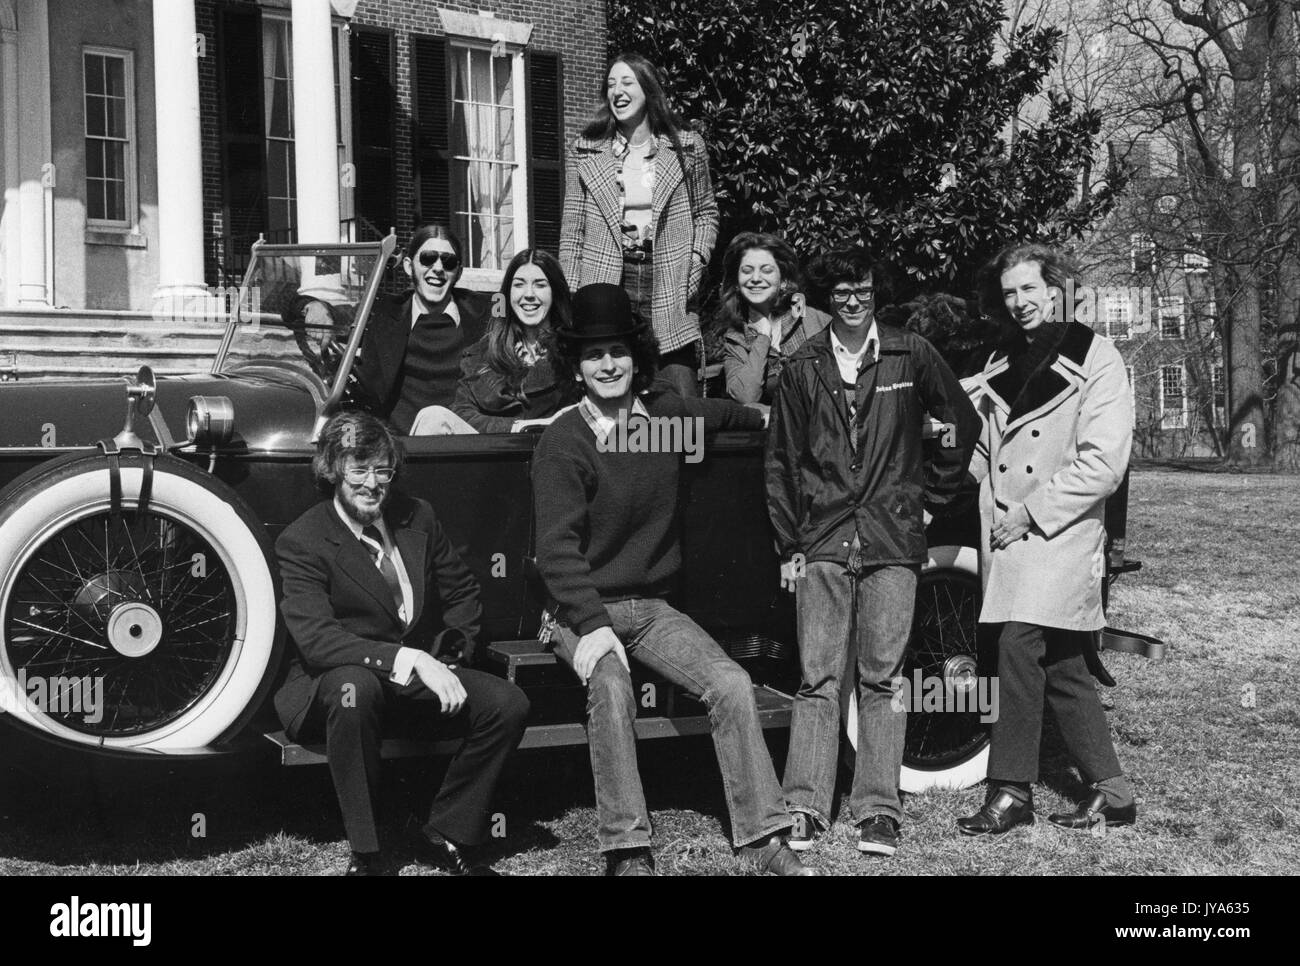 A group of undergraduate college students from Johns Hopkins University are gathered around a 1923 Rolls Royce Phantom during the University's annual spring fair, which included outdoor concerts, plays, rides, vendors, and more. April, 1975. Stock Photo